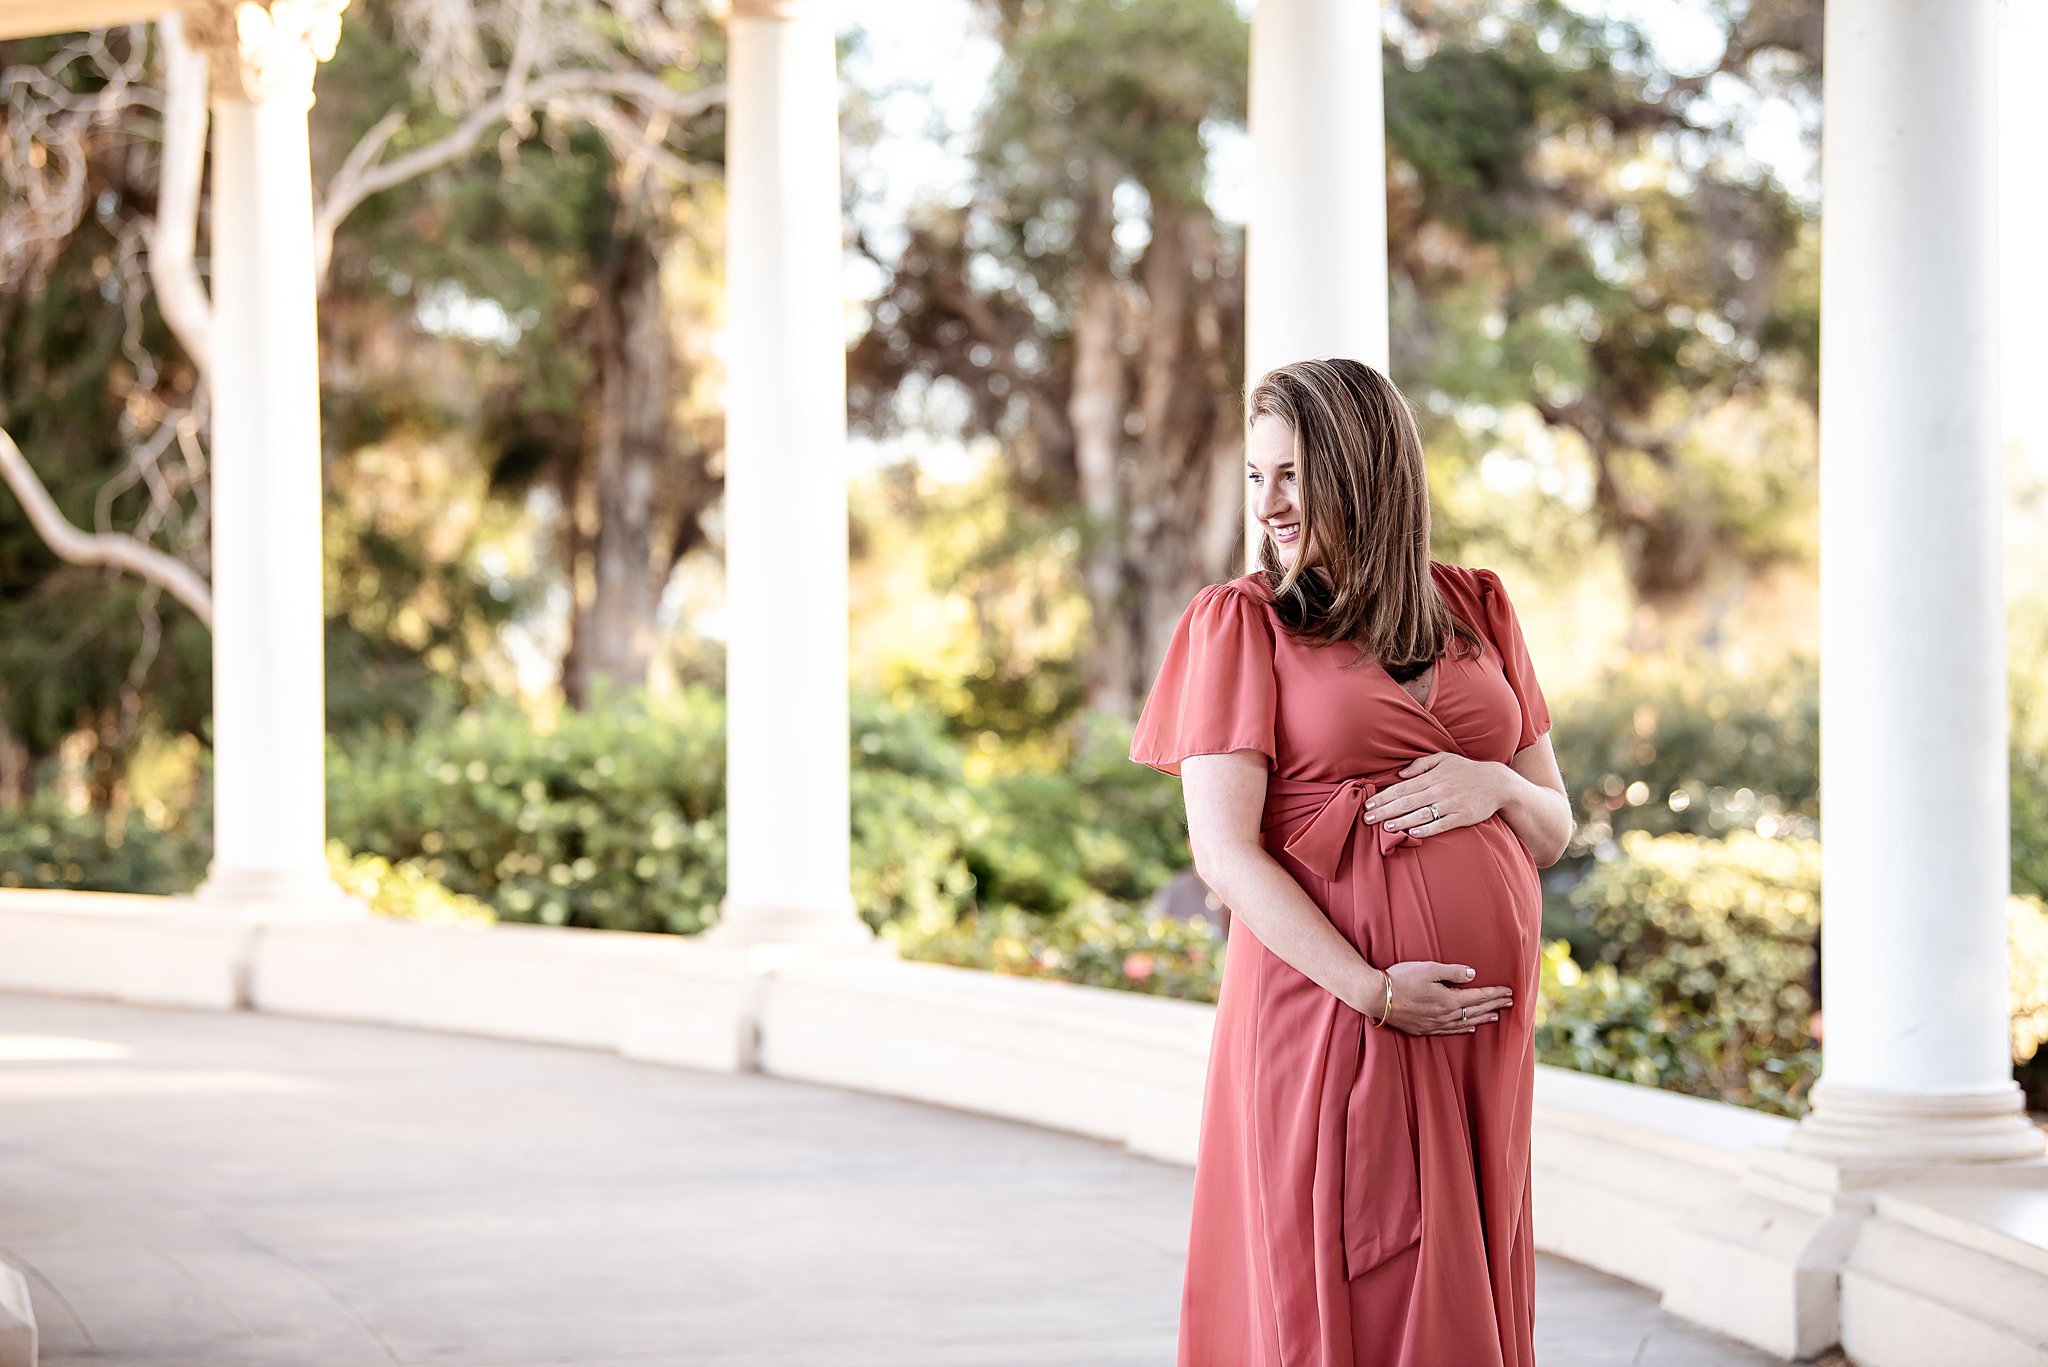 A mom looks over her shoulder while standing in a park in a pink maternity gown